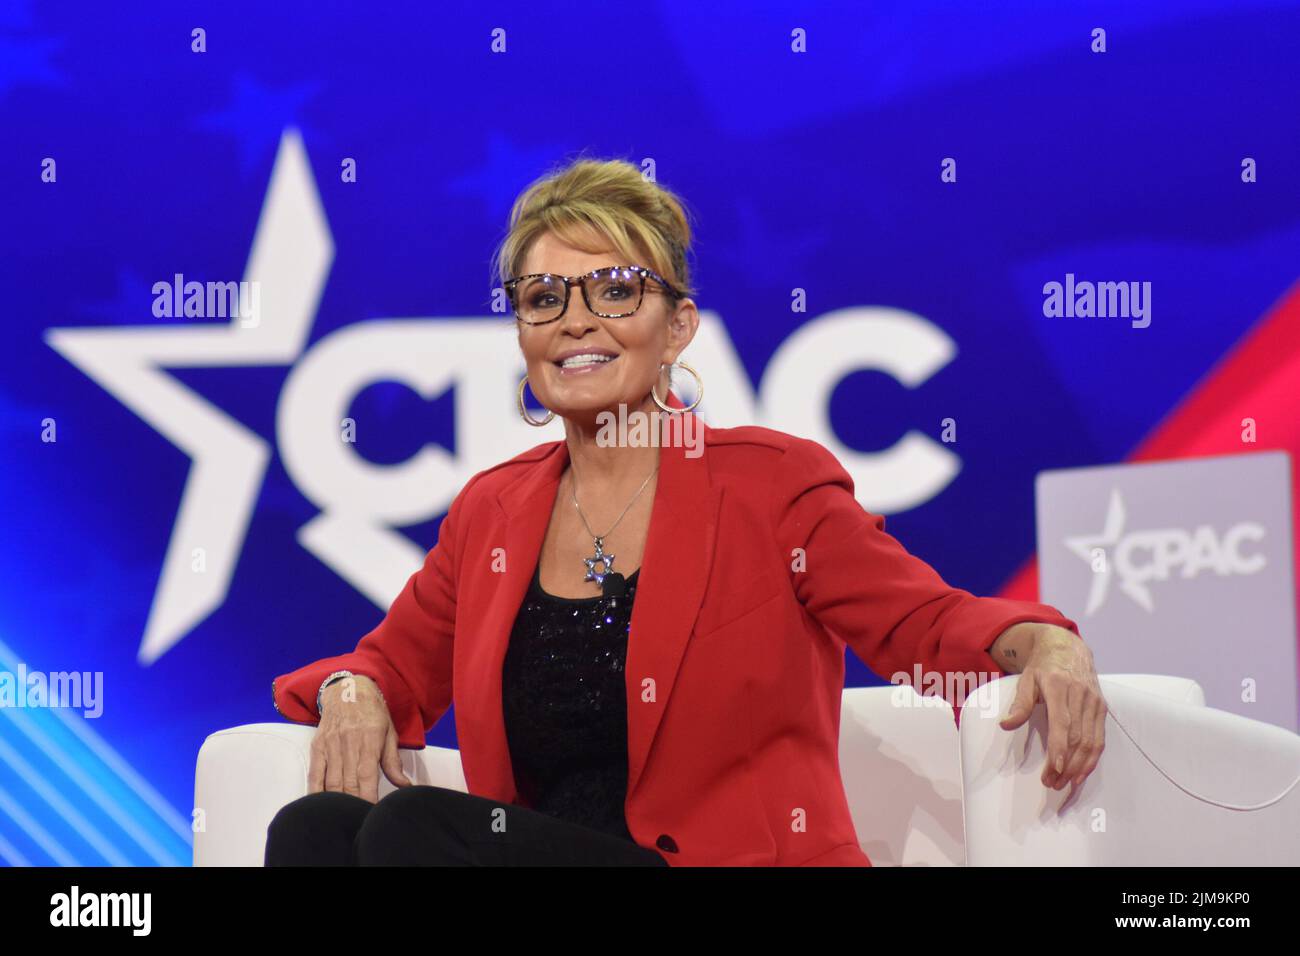 Dallas, Texas, USA. 4th Aug, 2022. Sarah Palin delivers remarks during the Conservative Political Action Conference (CPAC), held in the state of Texas. Sarah Palin is running for Congress to replace Representative Don Young, who died. Sarah Palin is a Former Governor of the State of Alaska. (Credit Image: © Kyle Mazza/TheNEWS2 via ZUMA Press Wire) Stock Photo